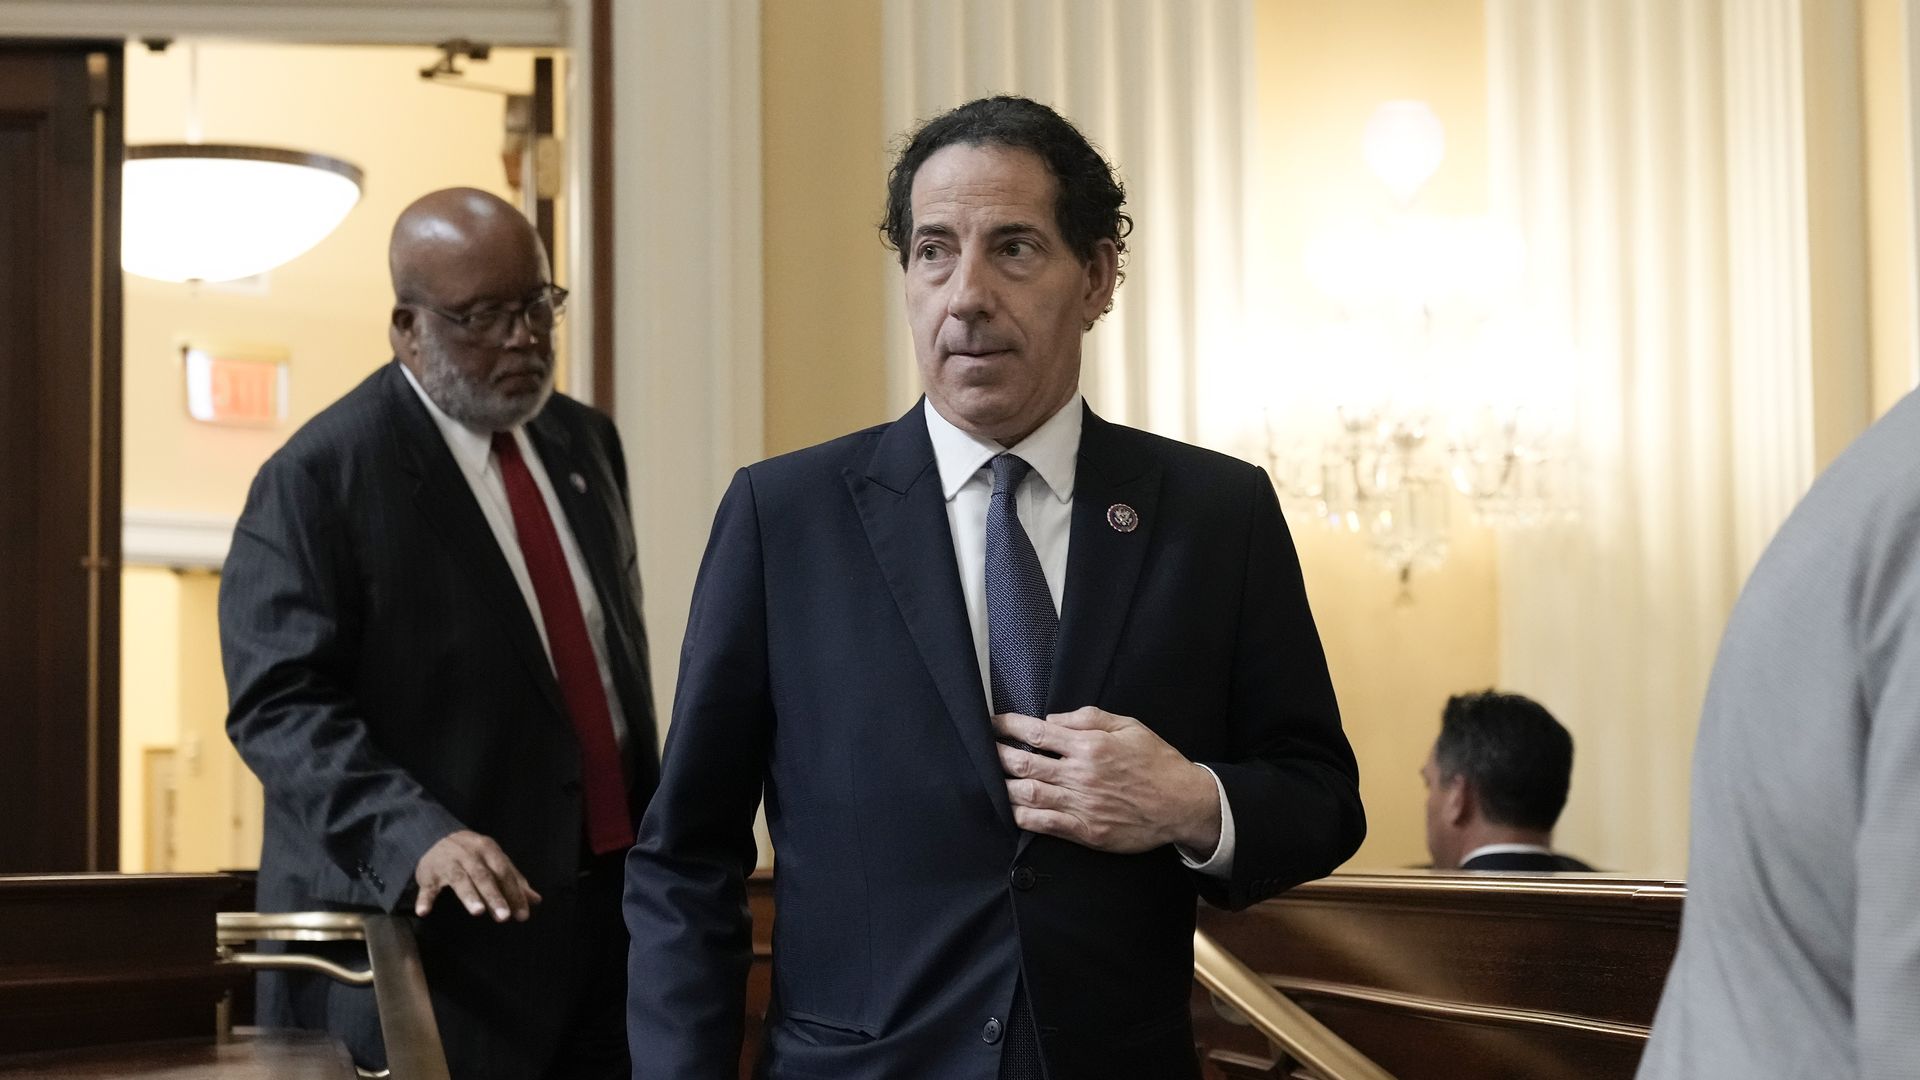 Reps. Bennie Thompson and Jamie Raskin at a Jan. 6 committee hearing